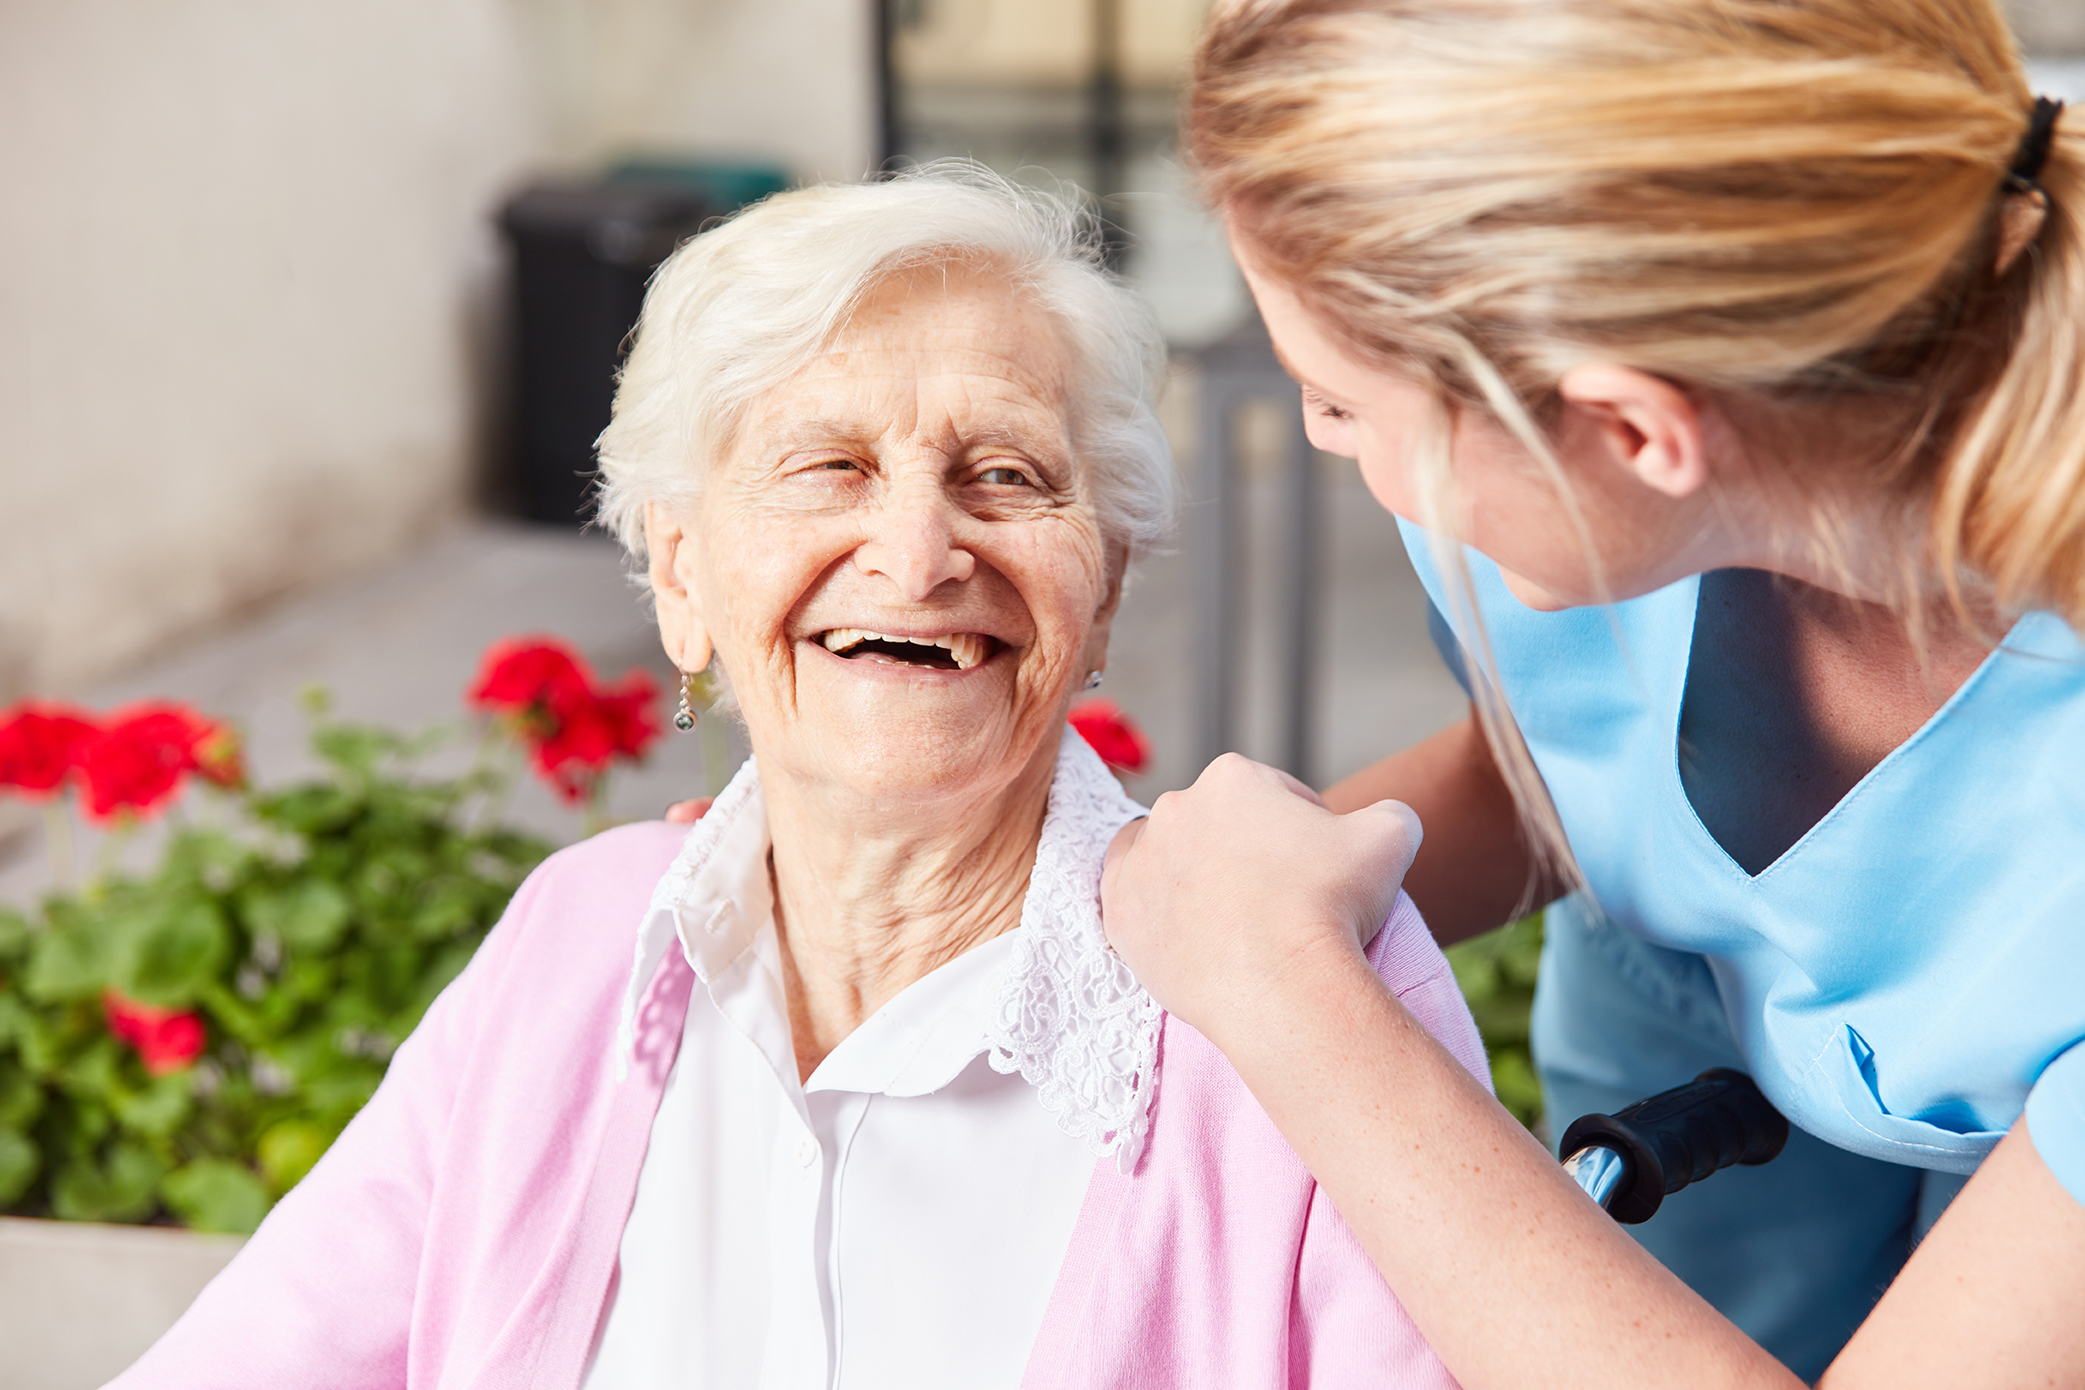 ACCPA: the unified voice of Australian aged care providers